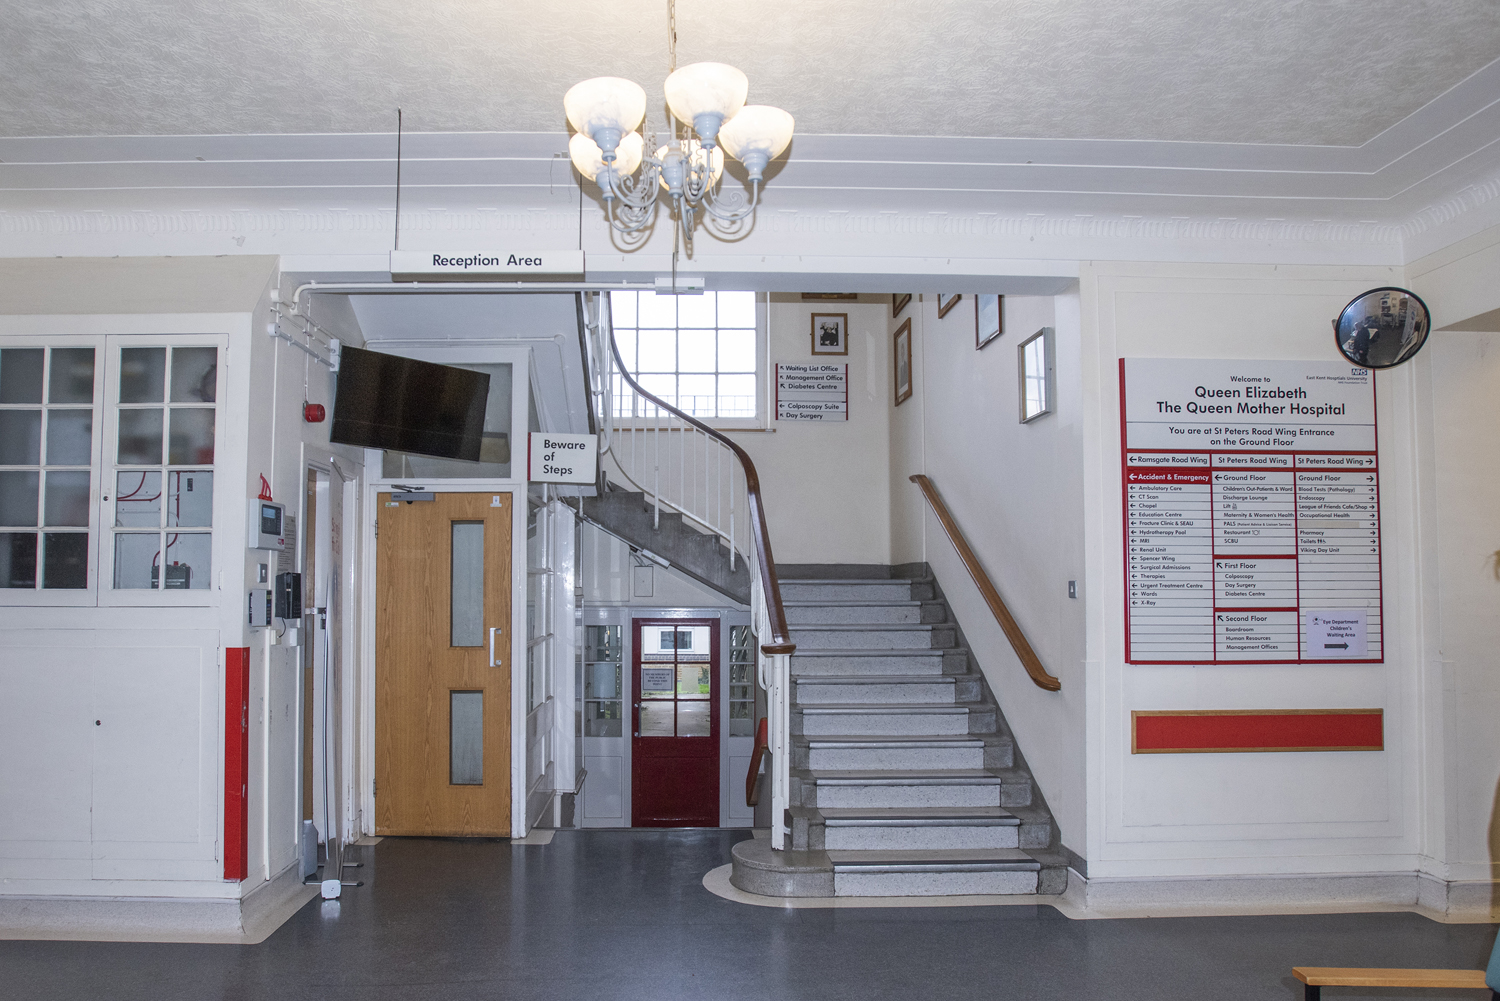 Photo of the stairs, just inside the St Peter's Road entrance doors, that go up to Day Surgery at QEQM